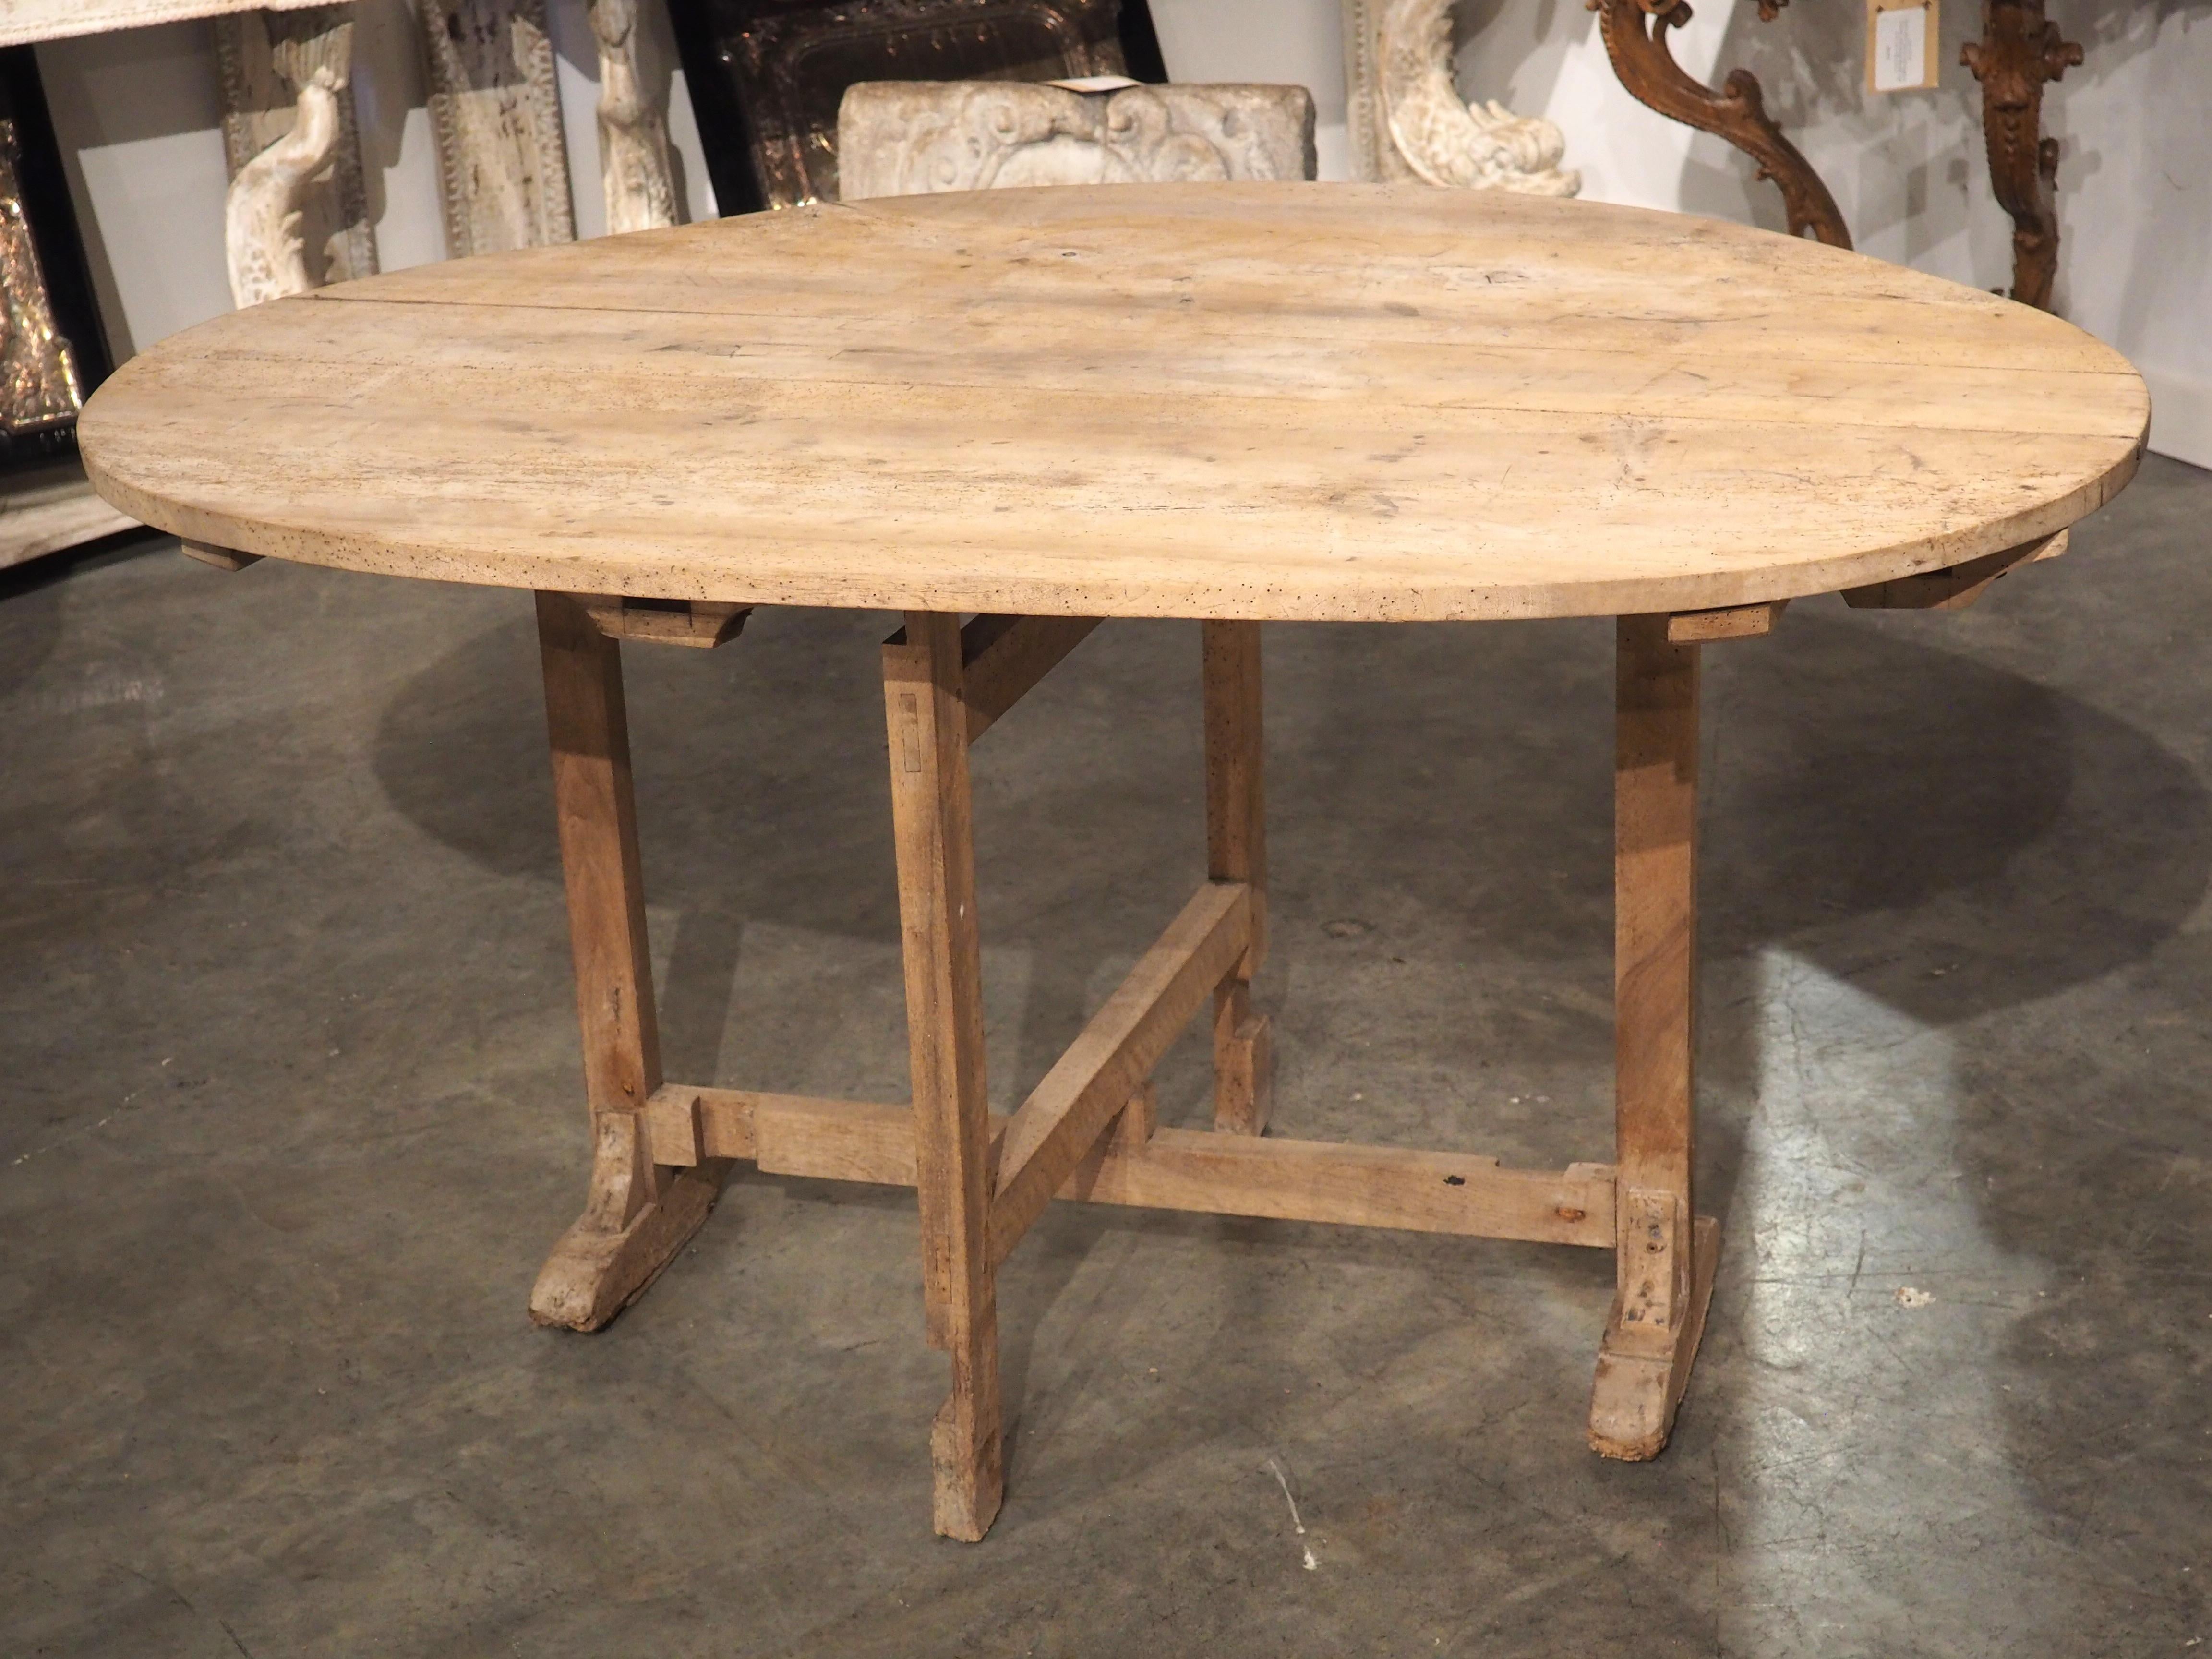 Larger than most tilt-top tables on the market, this wine-tasting table was most likely owned by a French vineyard in the 1800s. The large, ovate table can comfortably seat four or possibly even 6 people when in its upright position and the top